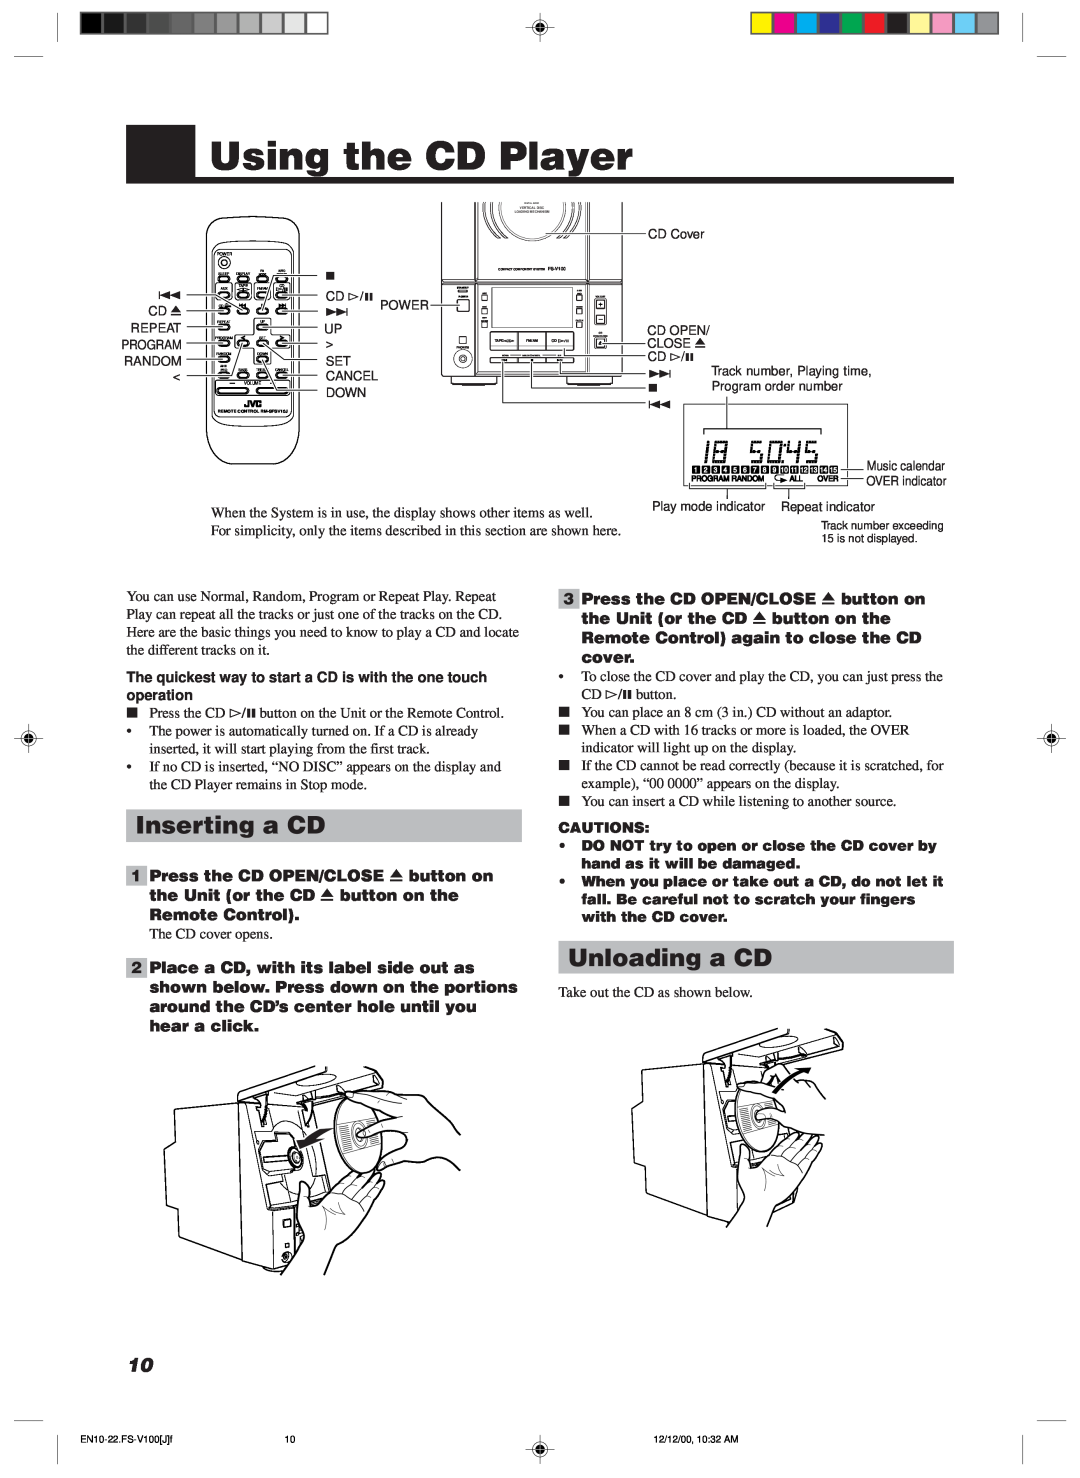 JVC FS-V100 manual Using the CD Player, Inserting a CD, Unloading a CD, Remote Control 